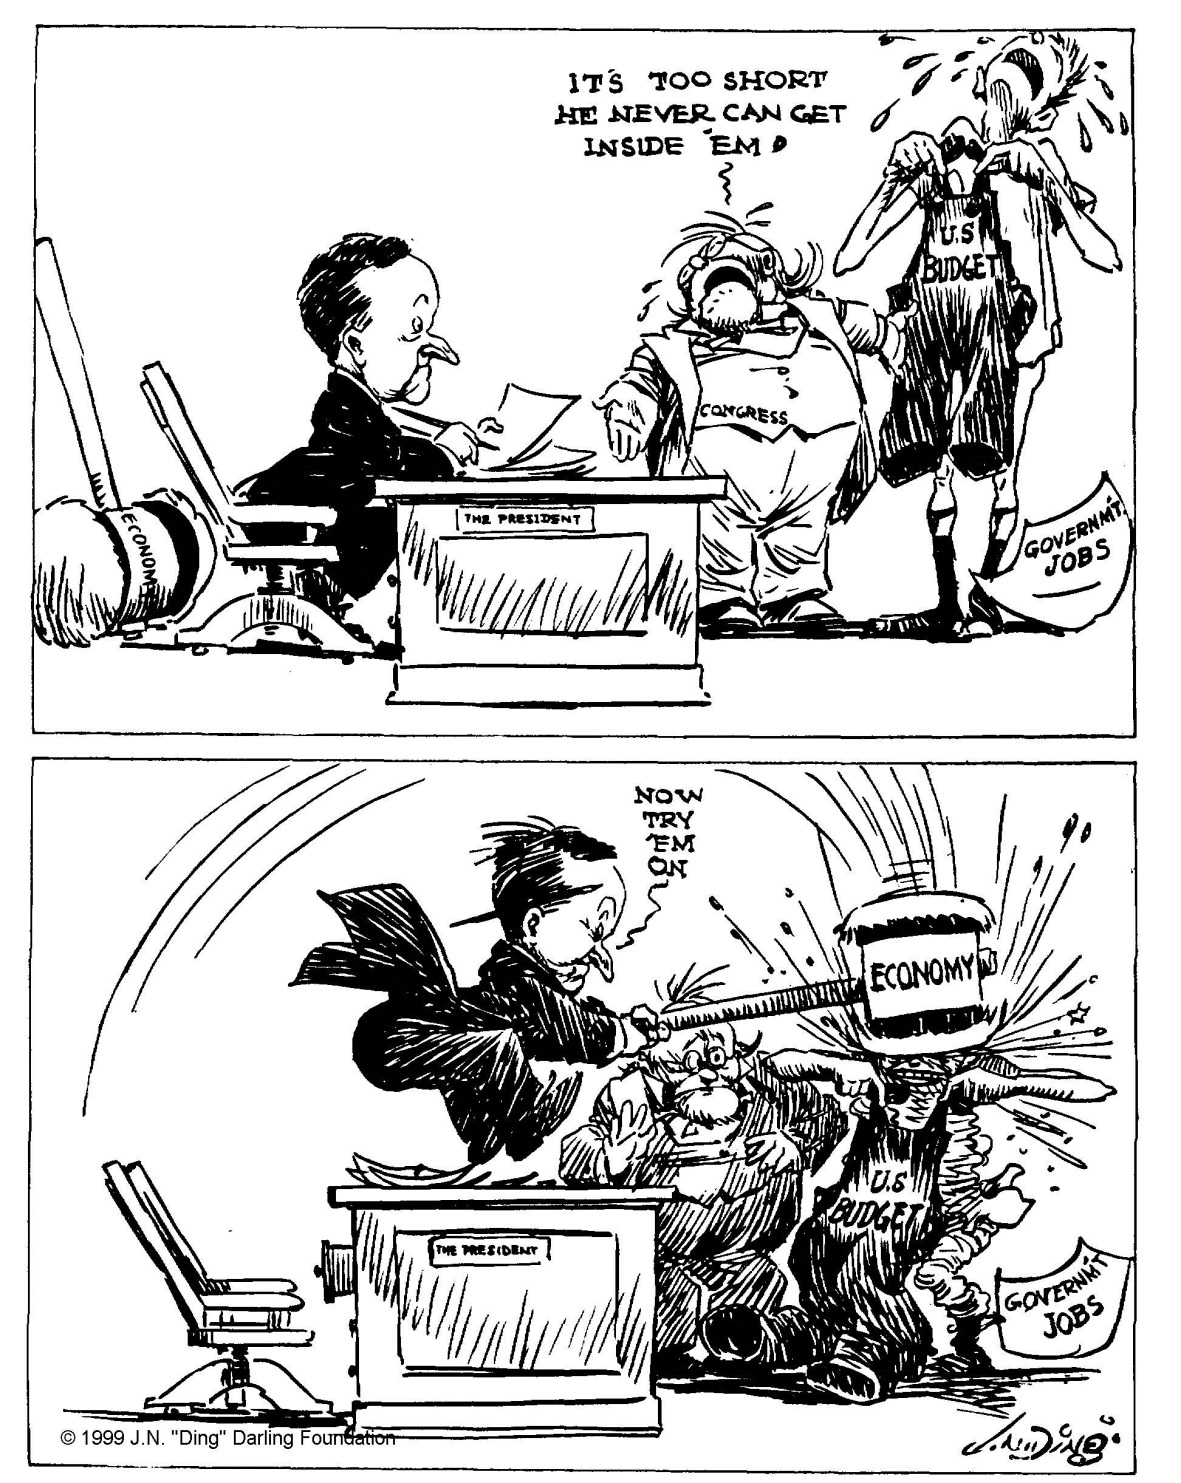 "If the budget is too small for the expenses, cut down the expenses," by "Ding" Darling, Des Moines Register, January 30, 1925. It was at the next meeting in June that year, Coolidge delved into the matter of States and the Federal Budget, "Unfortunately the Federal Government has strayed far afield from its legitimate business. It has trespassed upon fields where there should be no trespass. If we could confine our Federal expenditures to the legitimate obligations and functions of the Federal Government a material reduction would be apparent. But far more important than this would be its effect upon the fabric of our constitutional form of government, which tends to be gradually weakened and undermined by this encroachment. The cure for this is not in our hands. It lies with the people. It will come when they realize the necessity of State assumption of State responsibility. It will come when they realize that the laws under which the Federal Government hands out contributions to the States is placing upon them a double burden of taxation - Federal taxation in the first instance to raise the moneys which the Government donates to the States, and State taxation in the second instance to meet the extravagances of State expenditures which are tempted by the Federal donations."